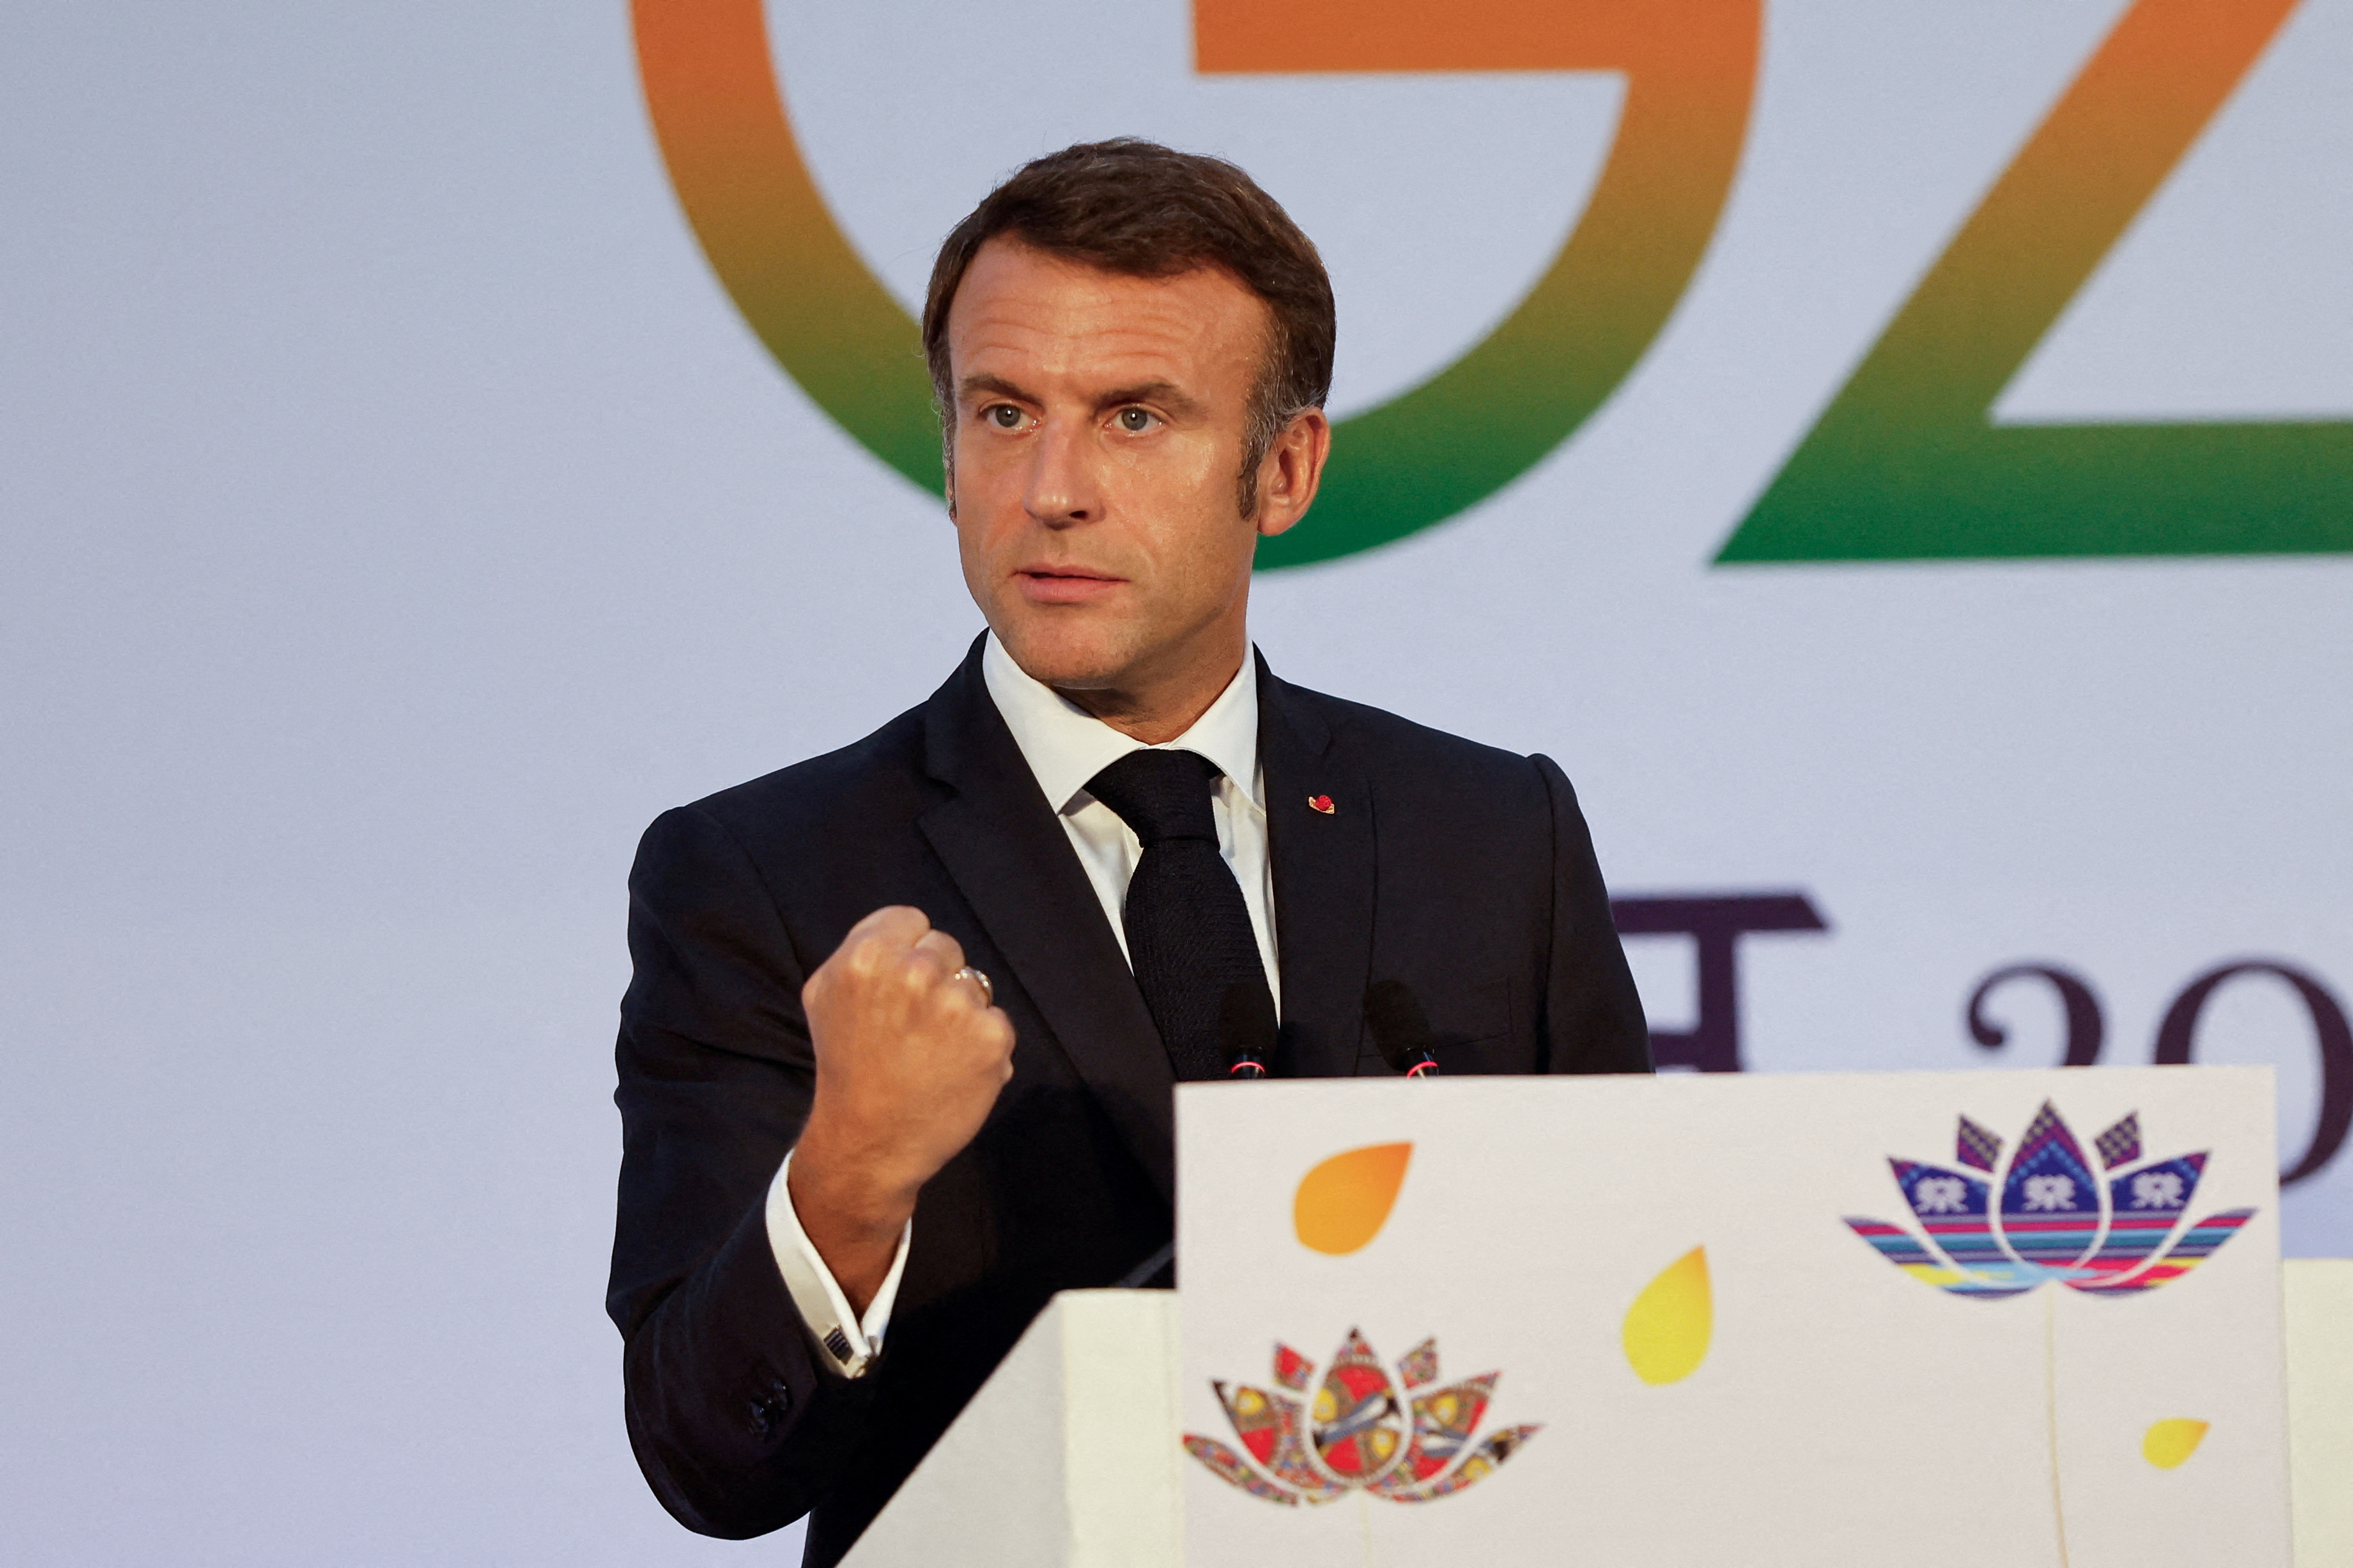 Macron launches ‘ecological plan’ to end France’s use of fossil fuels Image